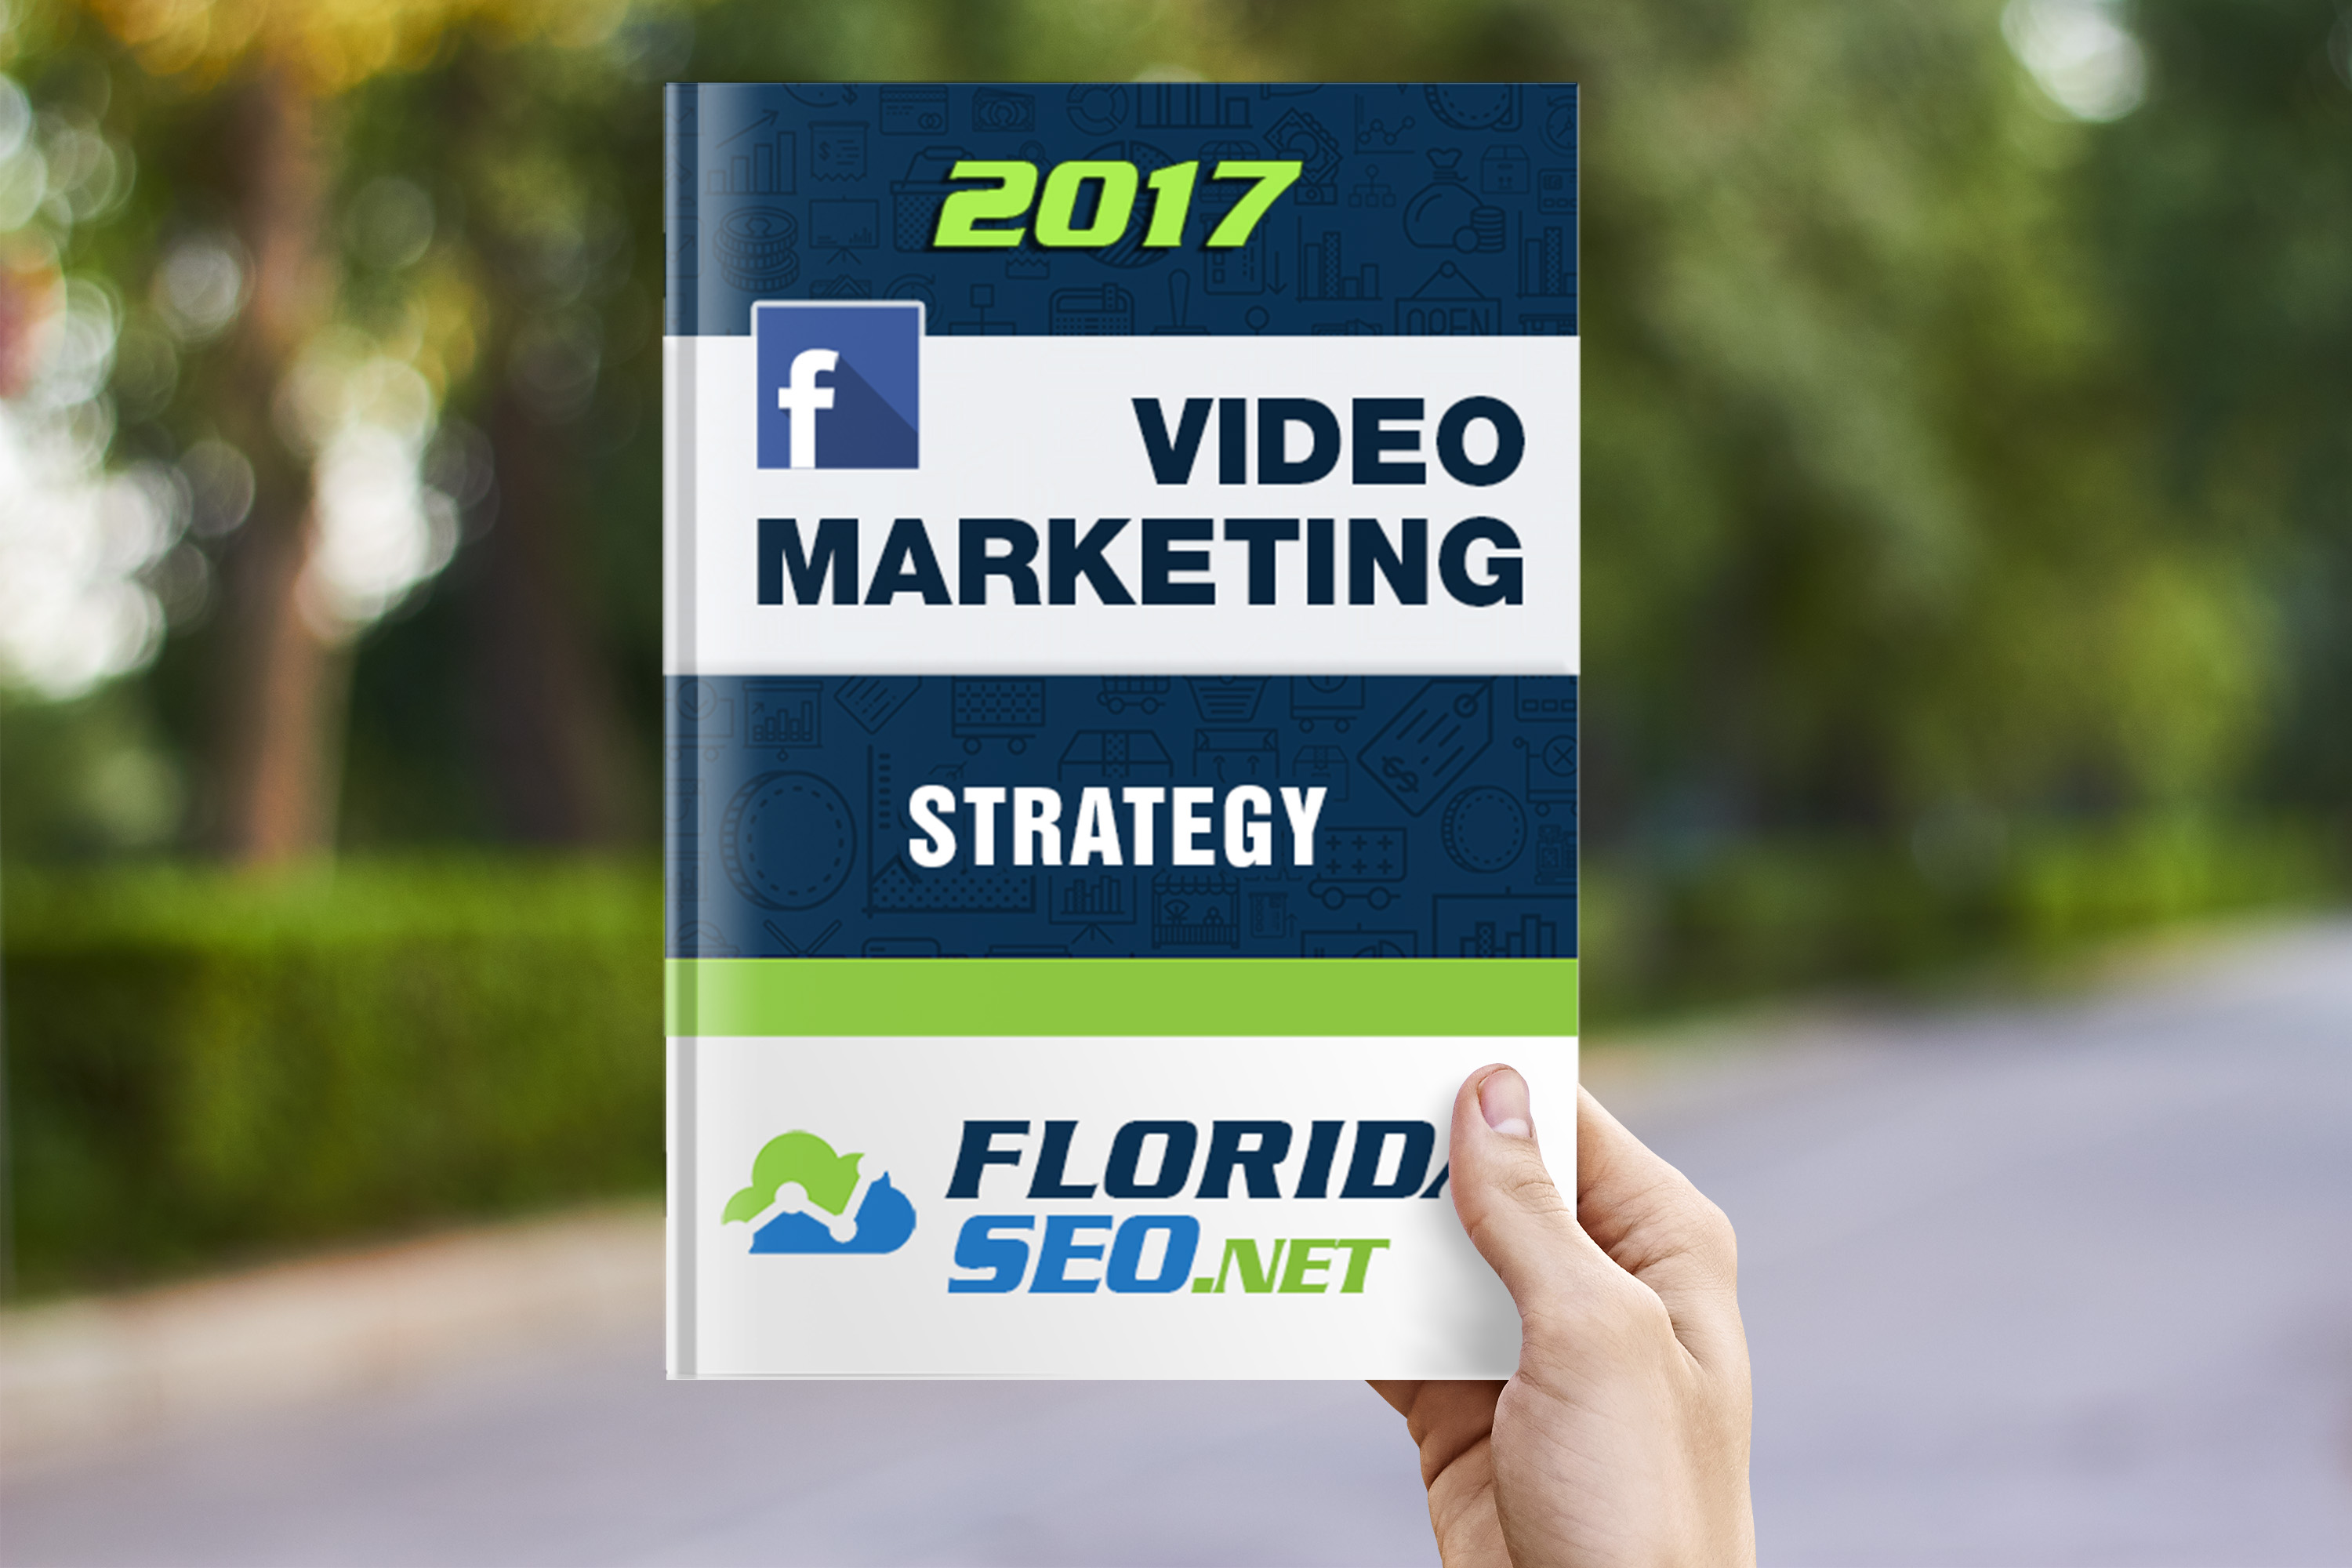 How to grow brand awareness with Facebook Video